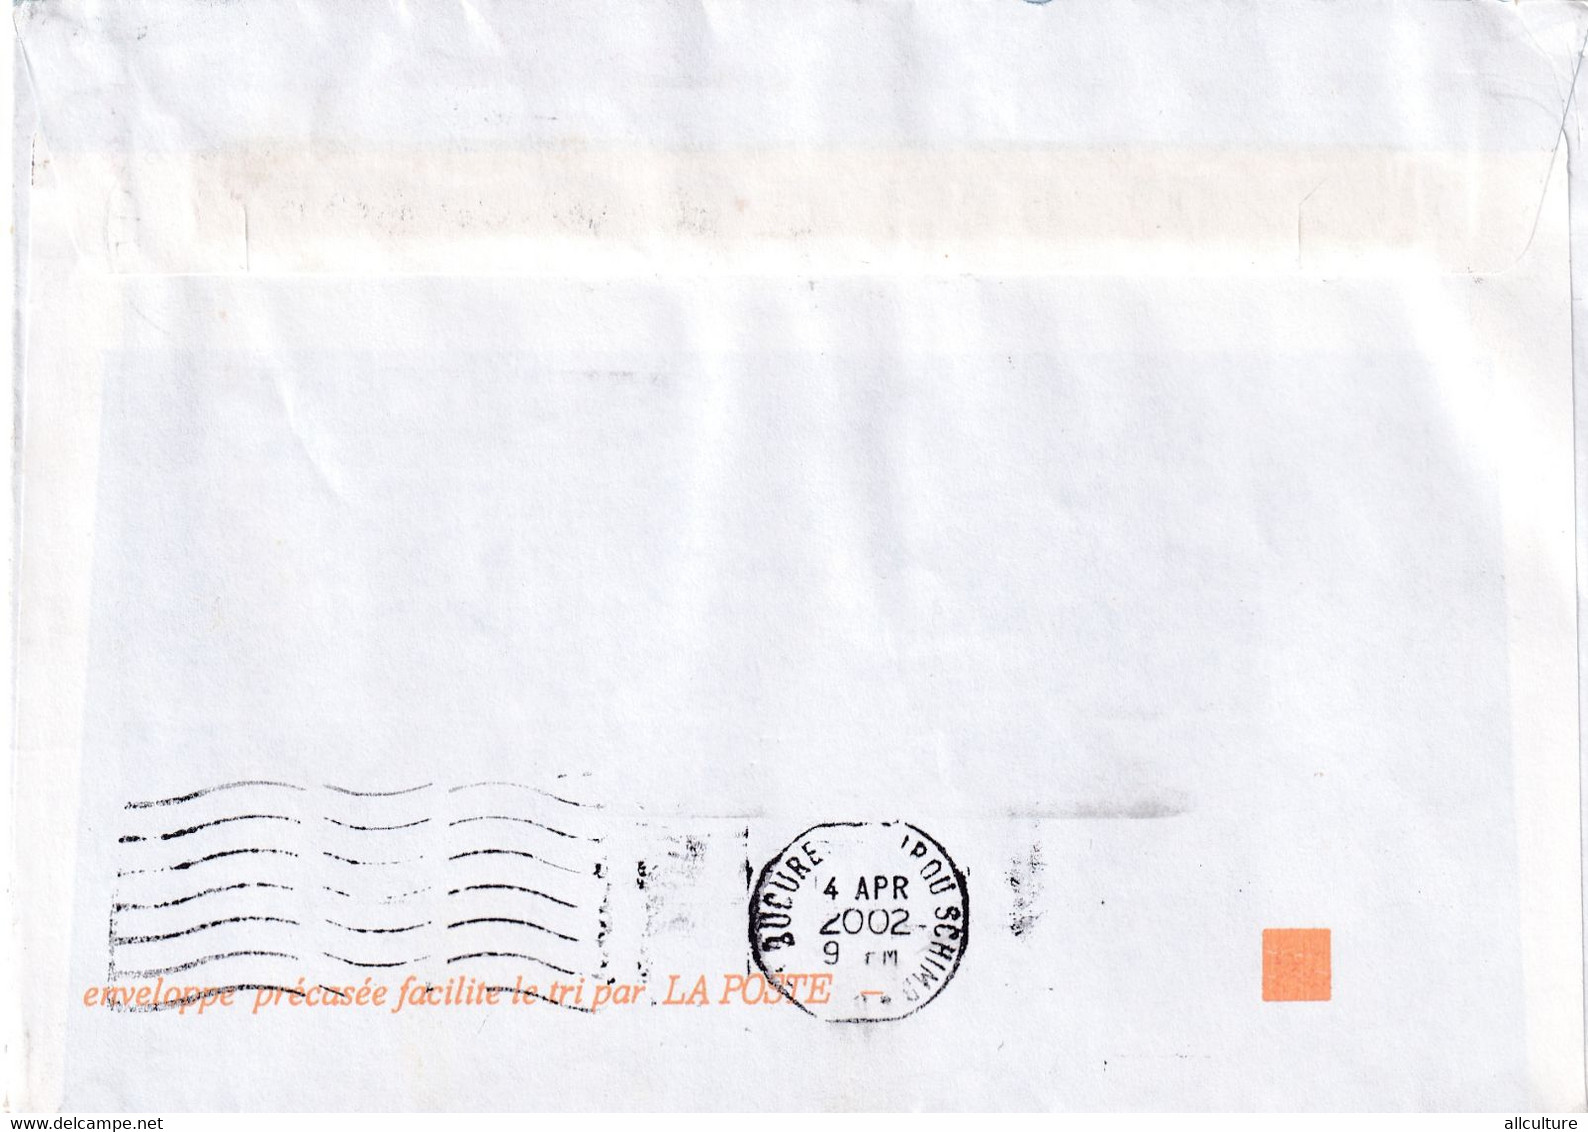 A9400 - LETTER FROM PARIS LA CHAPELLE 2002 REPUBLIK FRANCAISE USED STAMPS ON COVER SENT TO BUCHAREST ROMANIA - Covers & Documents